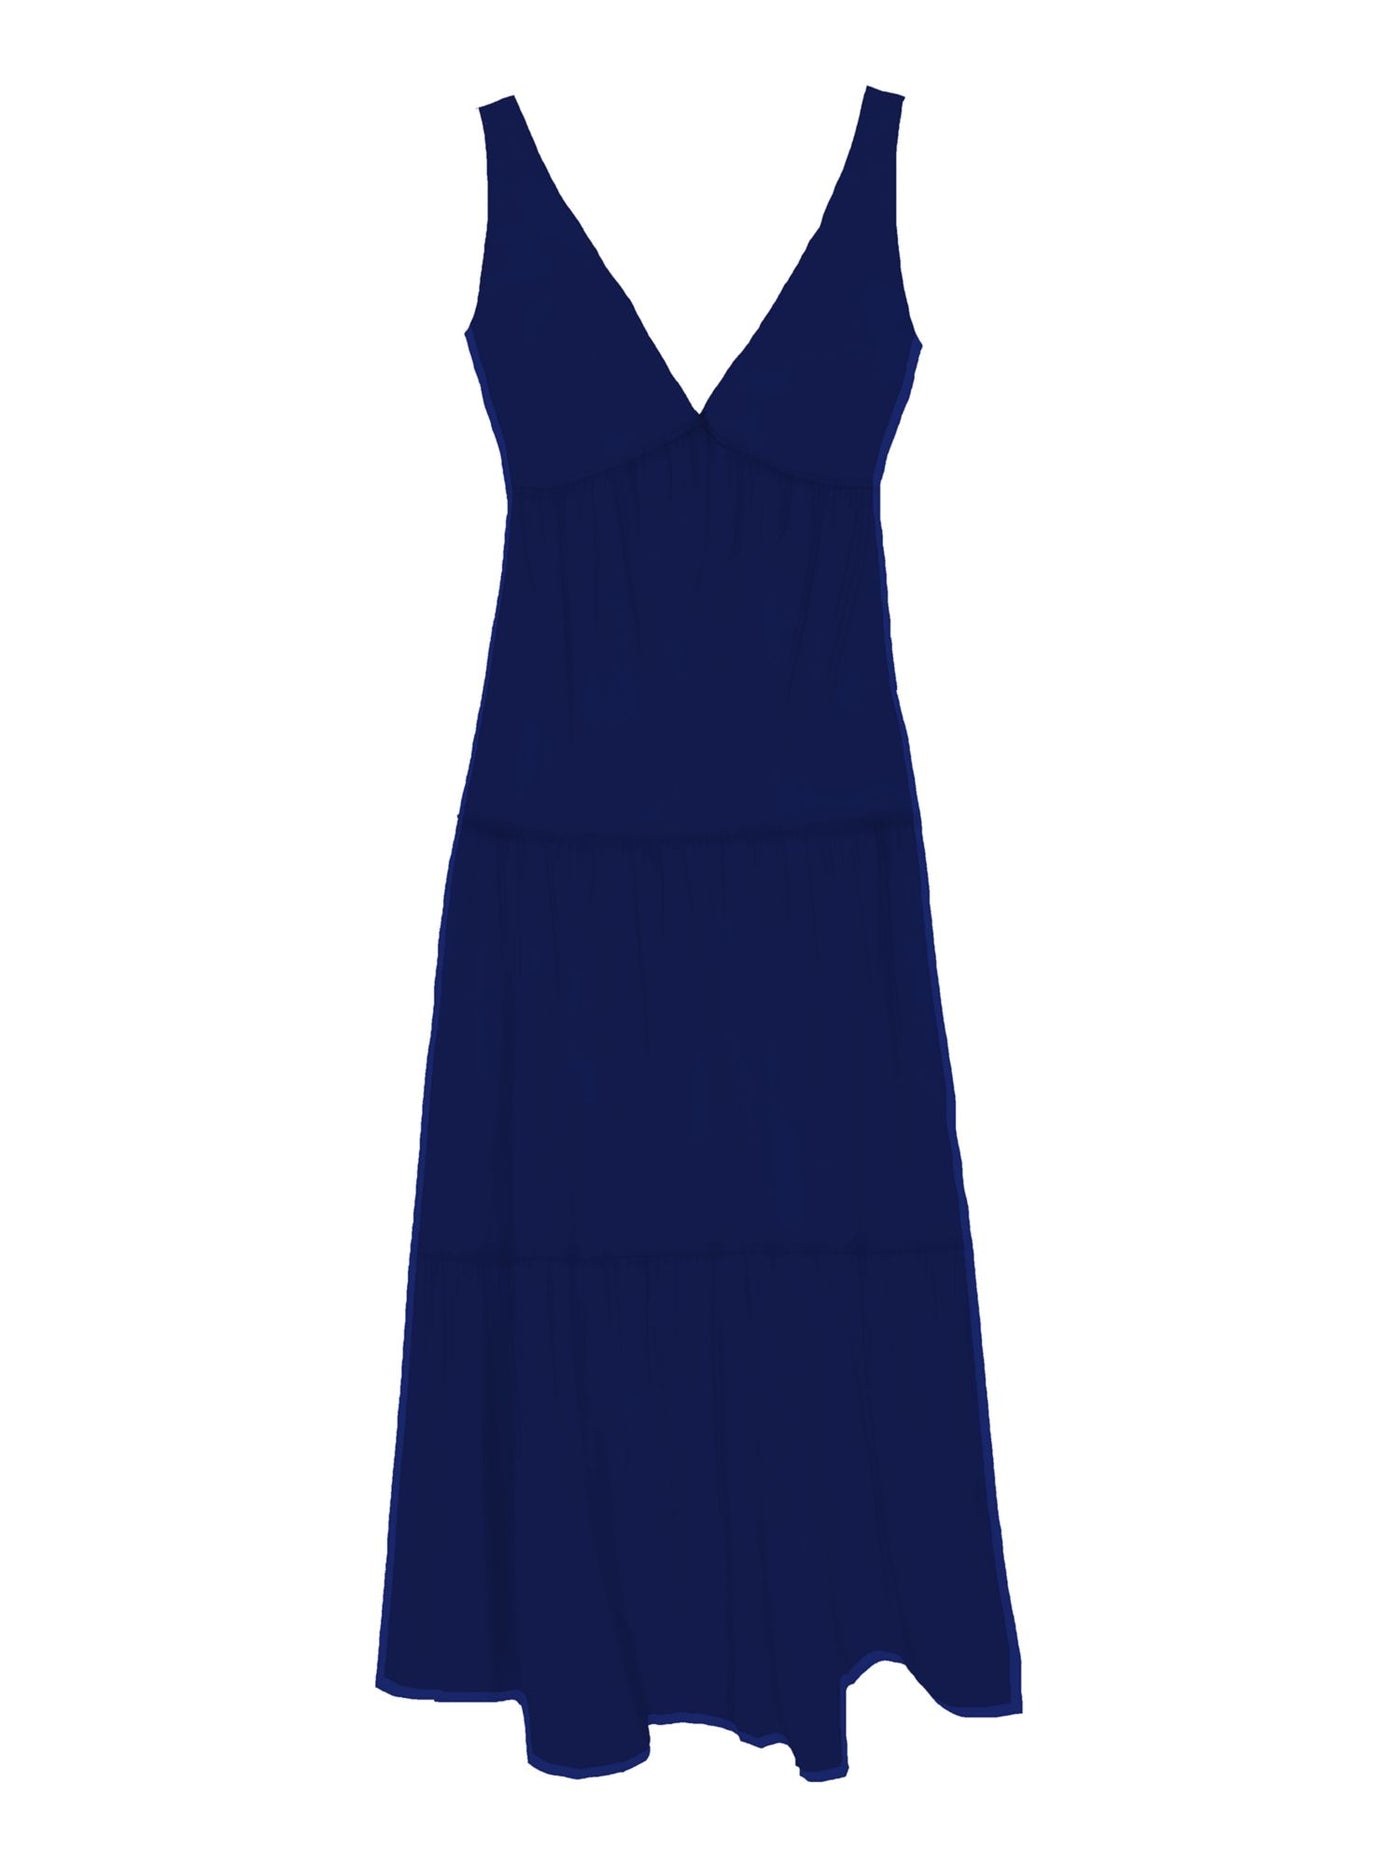 TAYLOR Womens Navy Smocked Sheer Pullover Tiered Lined Sleeveless V Neck Midi Fit + Flare Dress Petites 2P